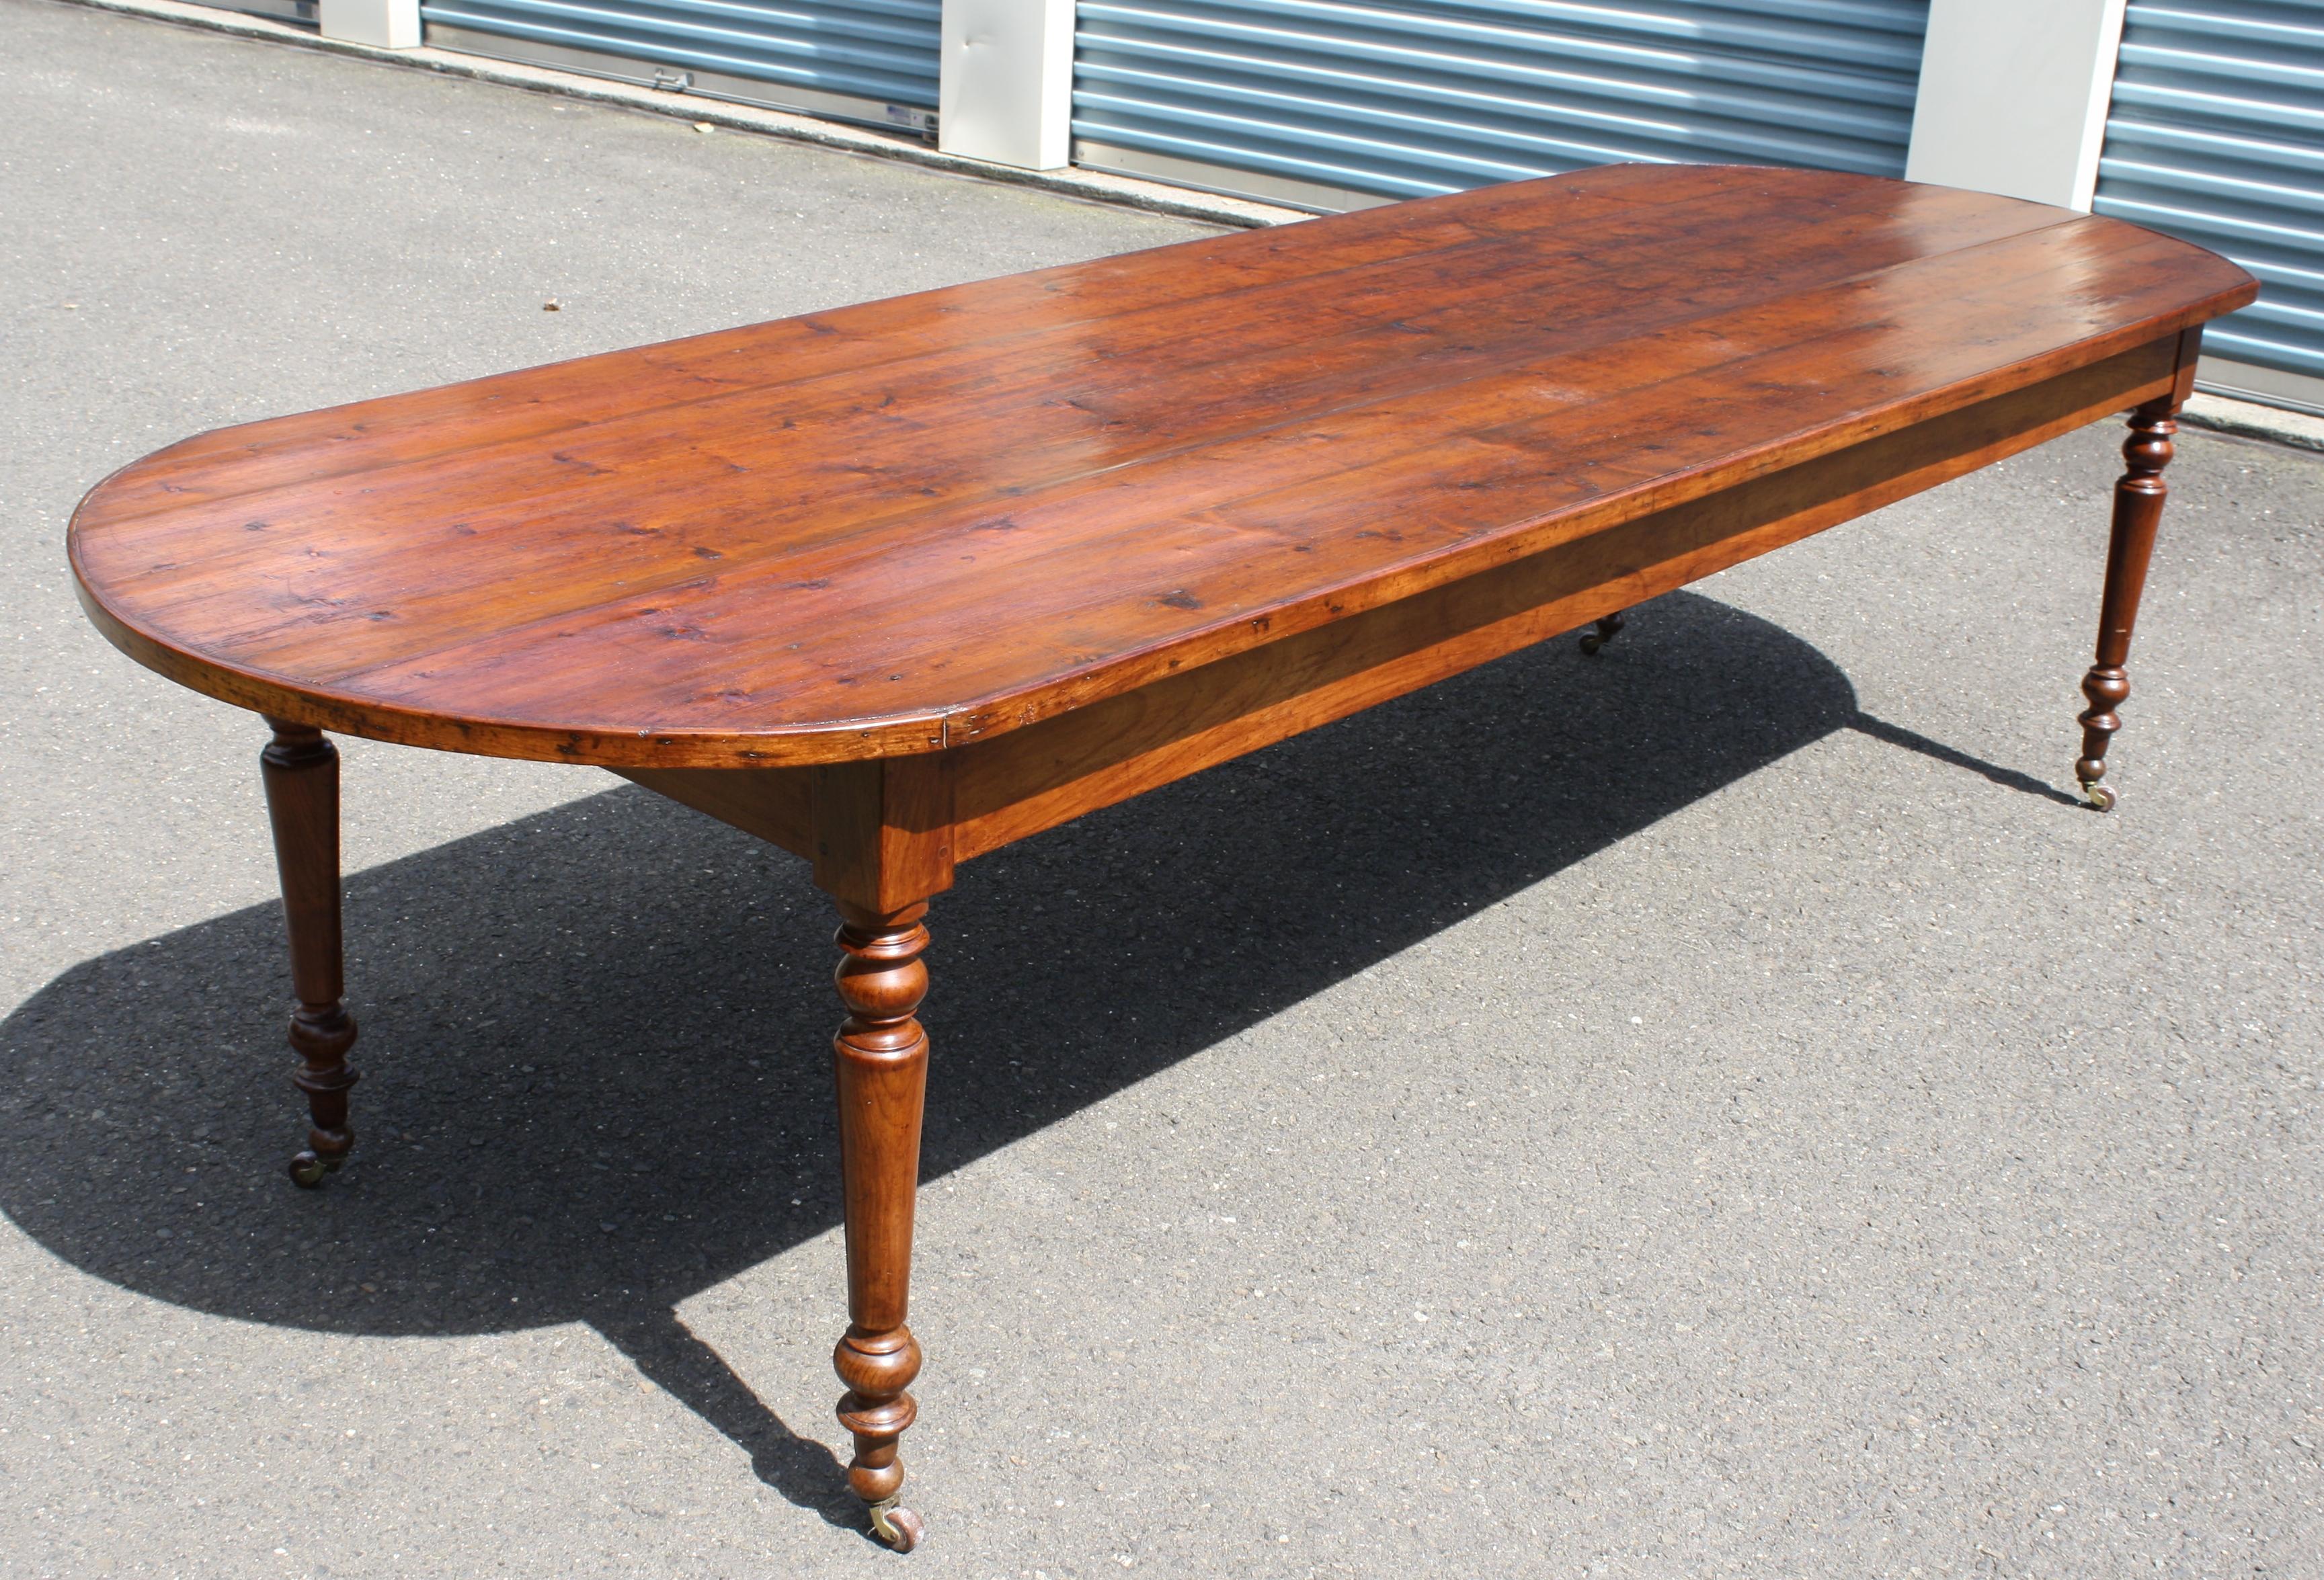 A rare and highly unusual demilune-ended farmhouse or refectory table, on four Sheraton-esque turned and castered legs. Accommodating 12 for dining with minimal interference of table legs and 24 inch frieze height, it appears to be of Middle